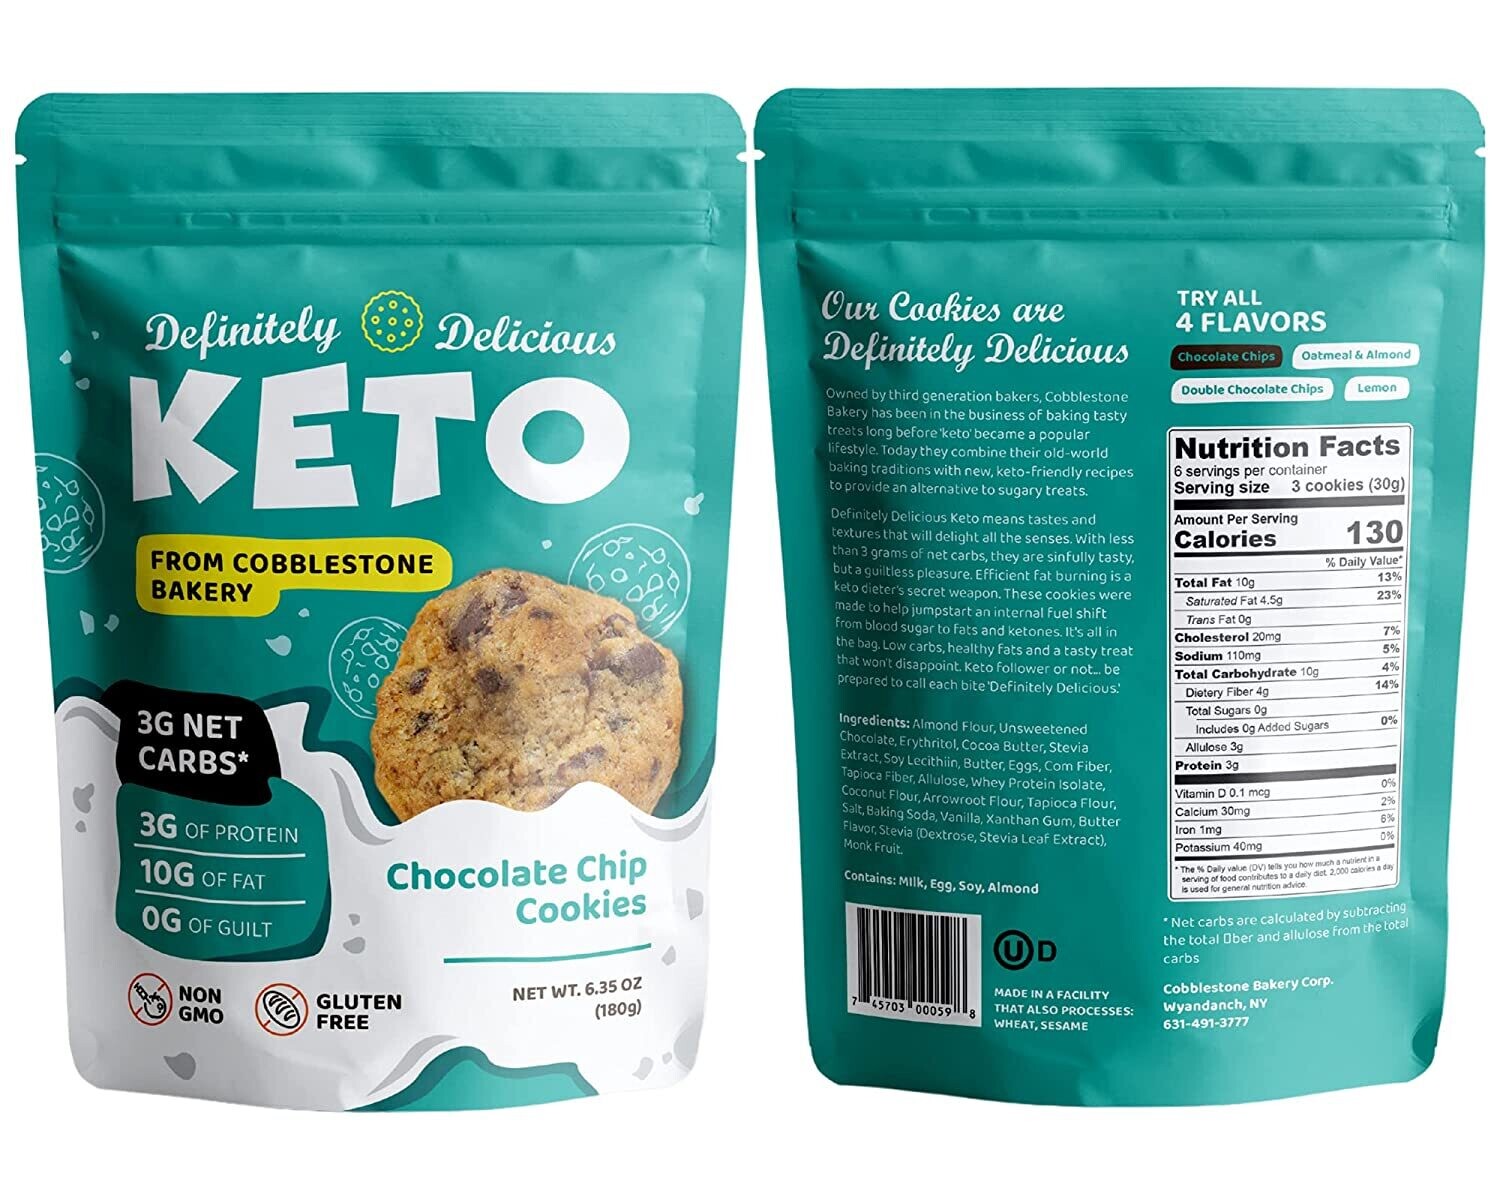 Definitely Delicious Keto from Cobblestone Bakery Chocolate Chip Cookies